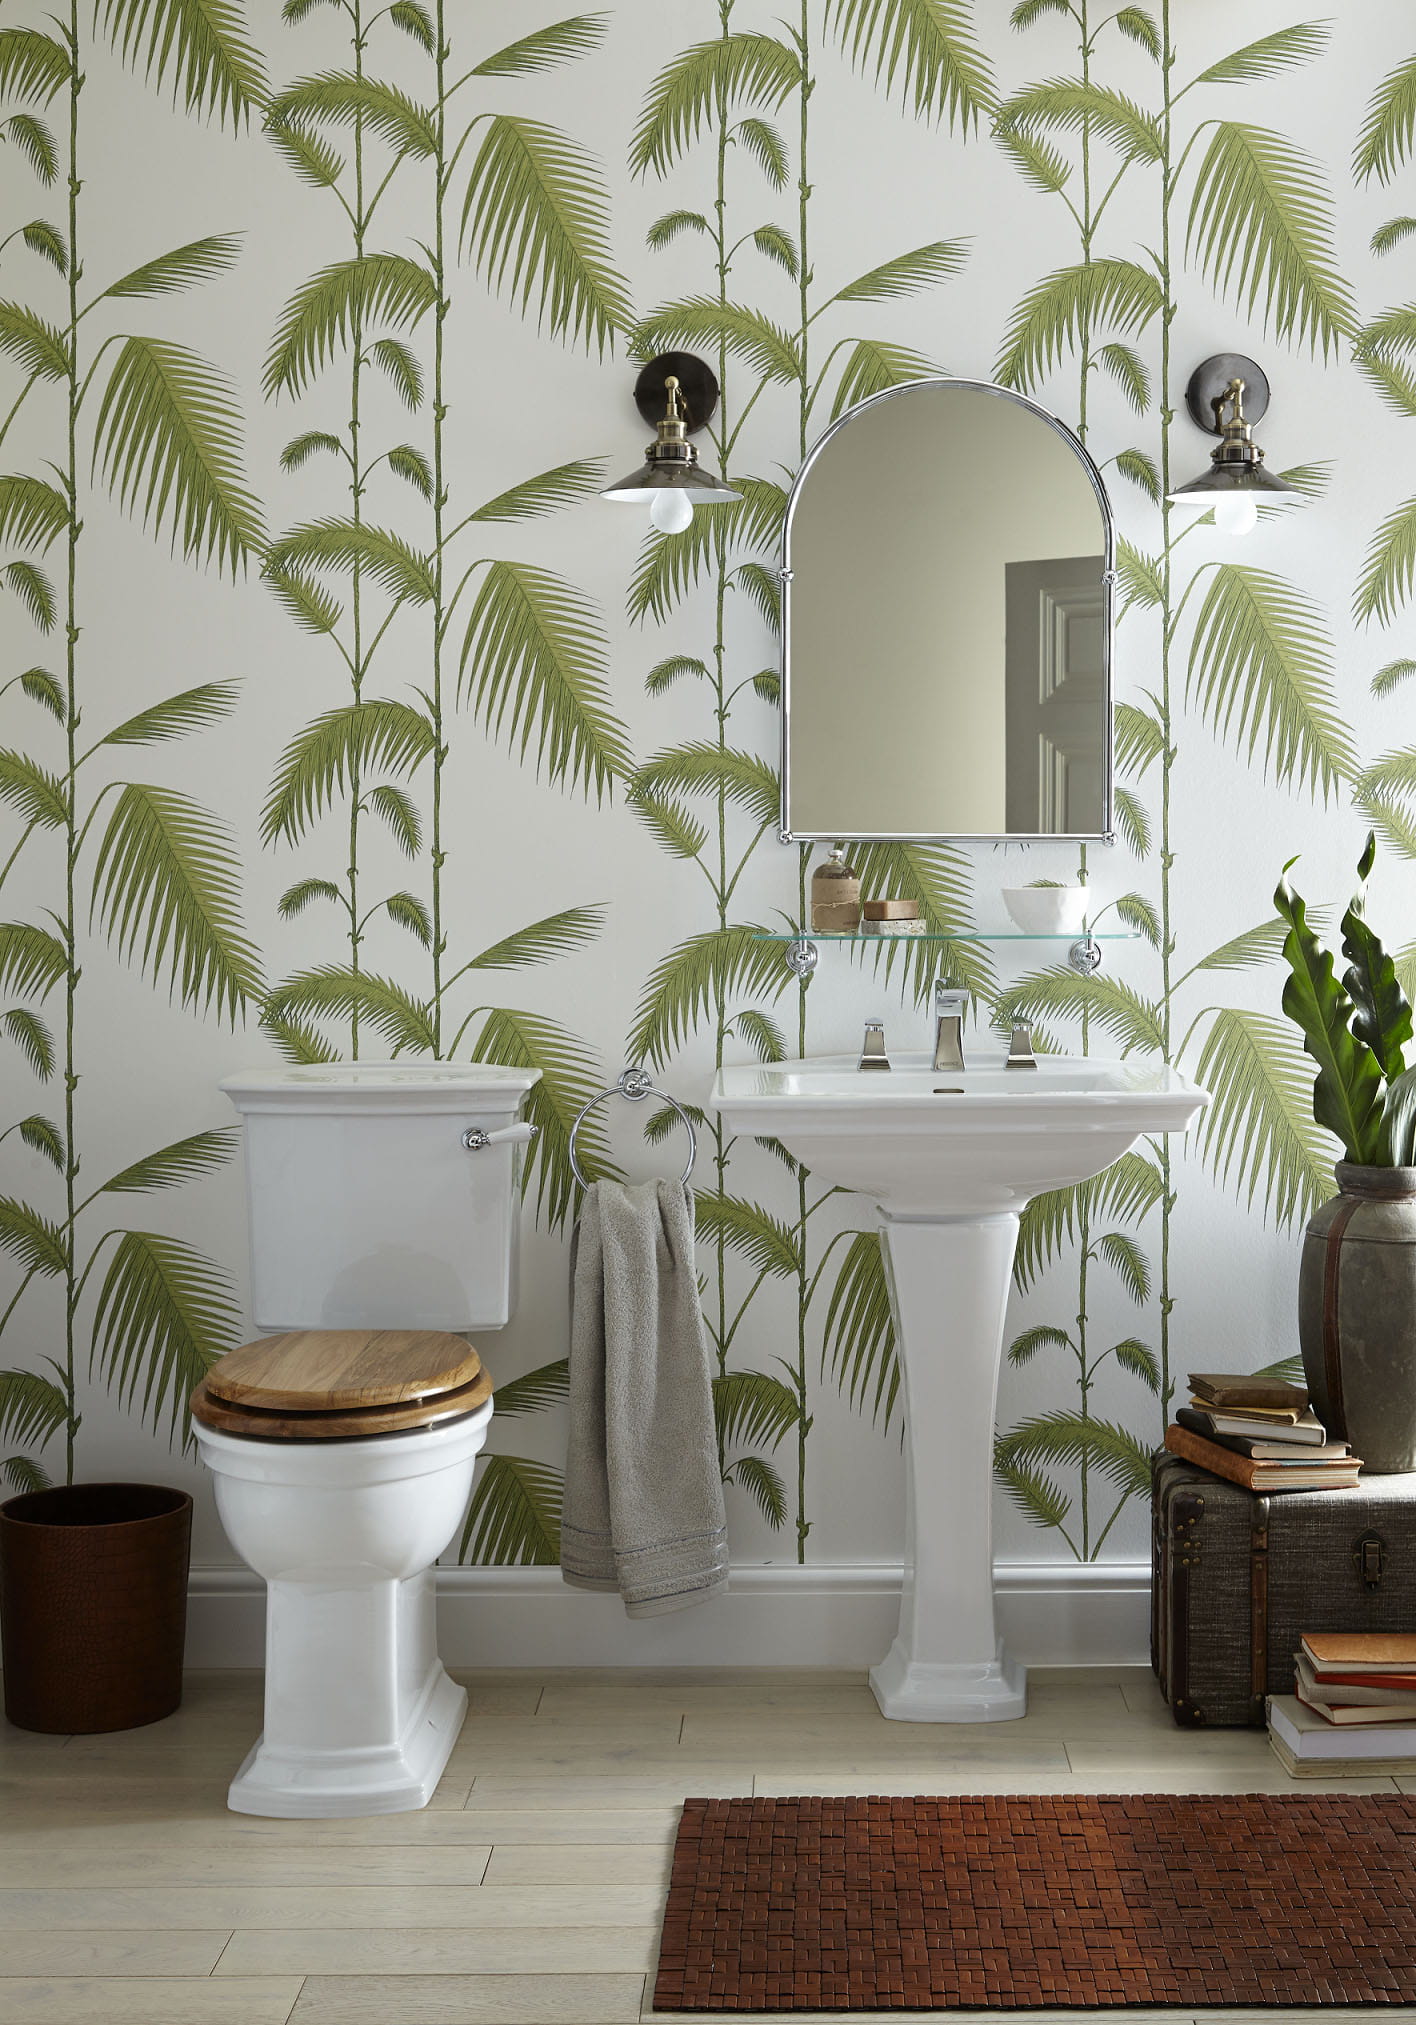 Blenheim suite with Palm Tree Wallpaper